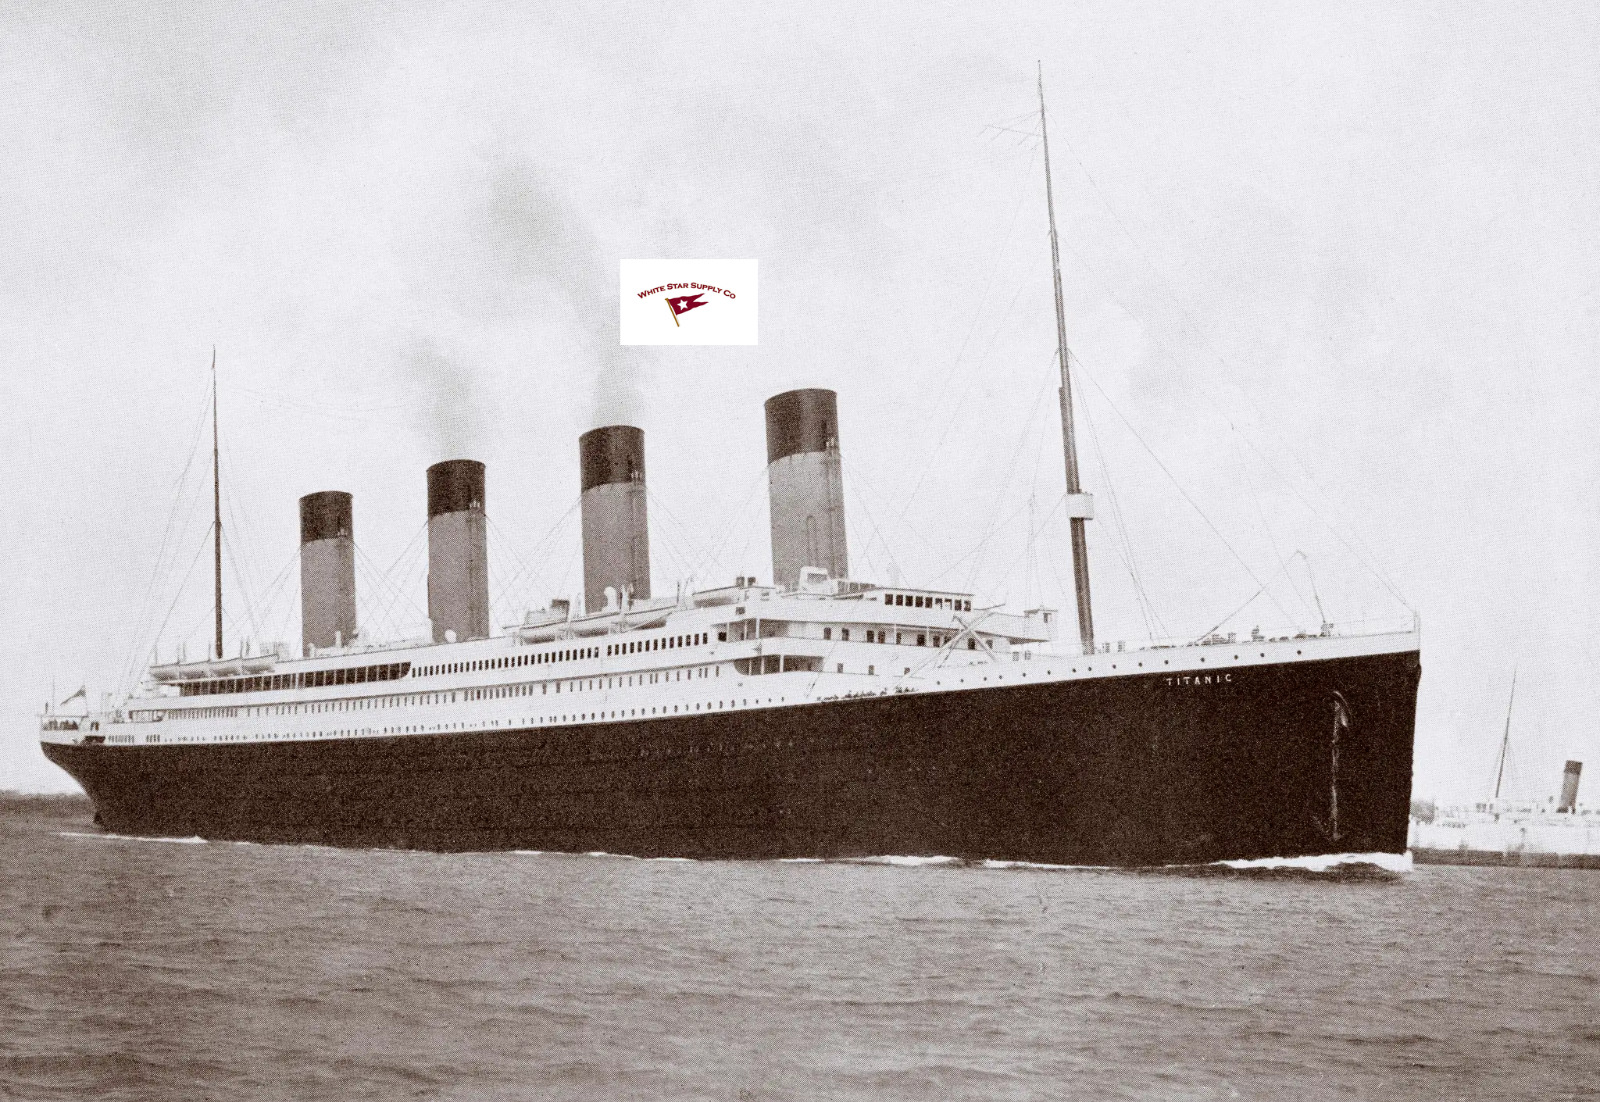 RMS TITANIC an iconic photo of the great ship, HQ reprint